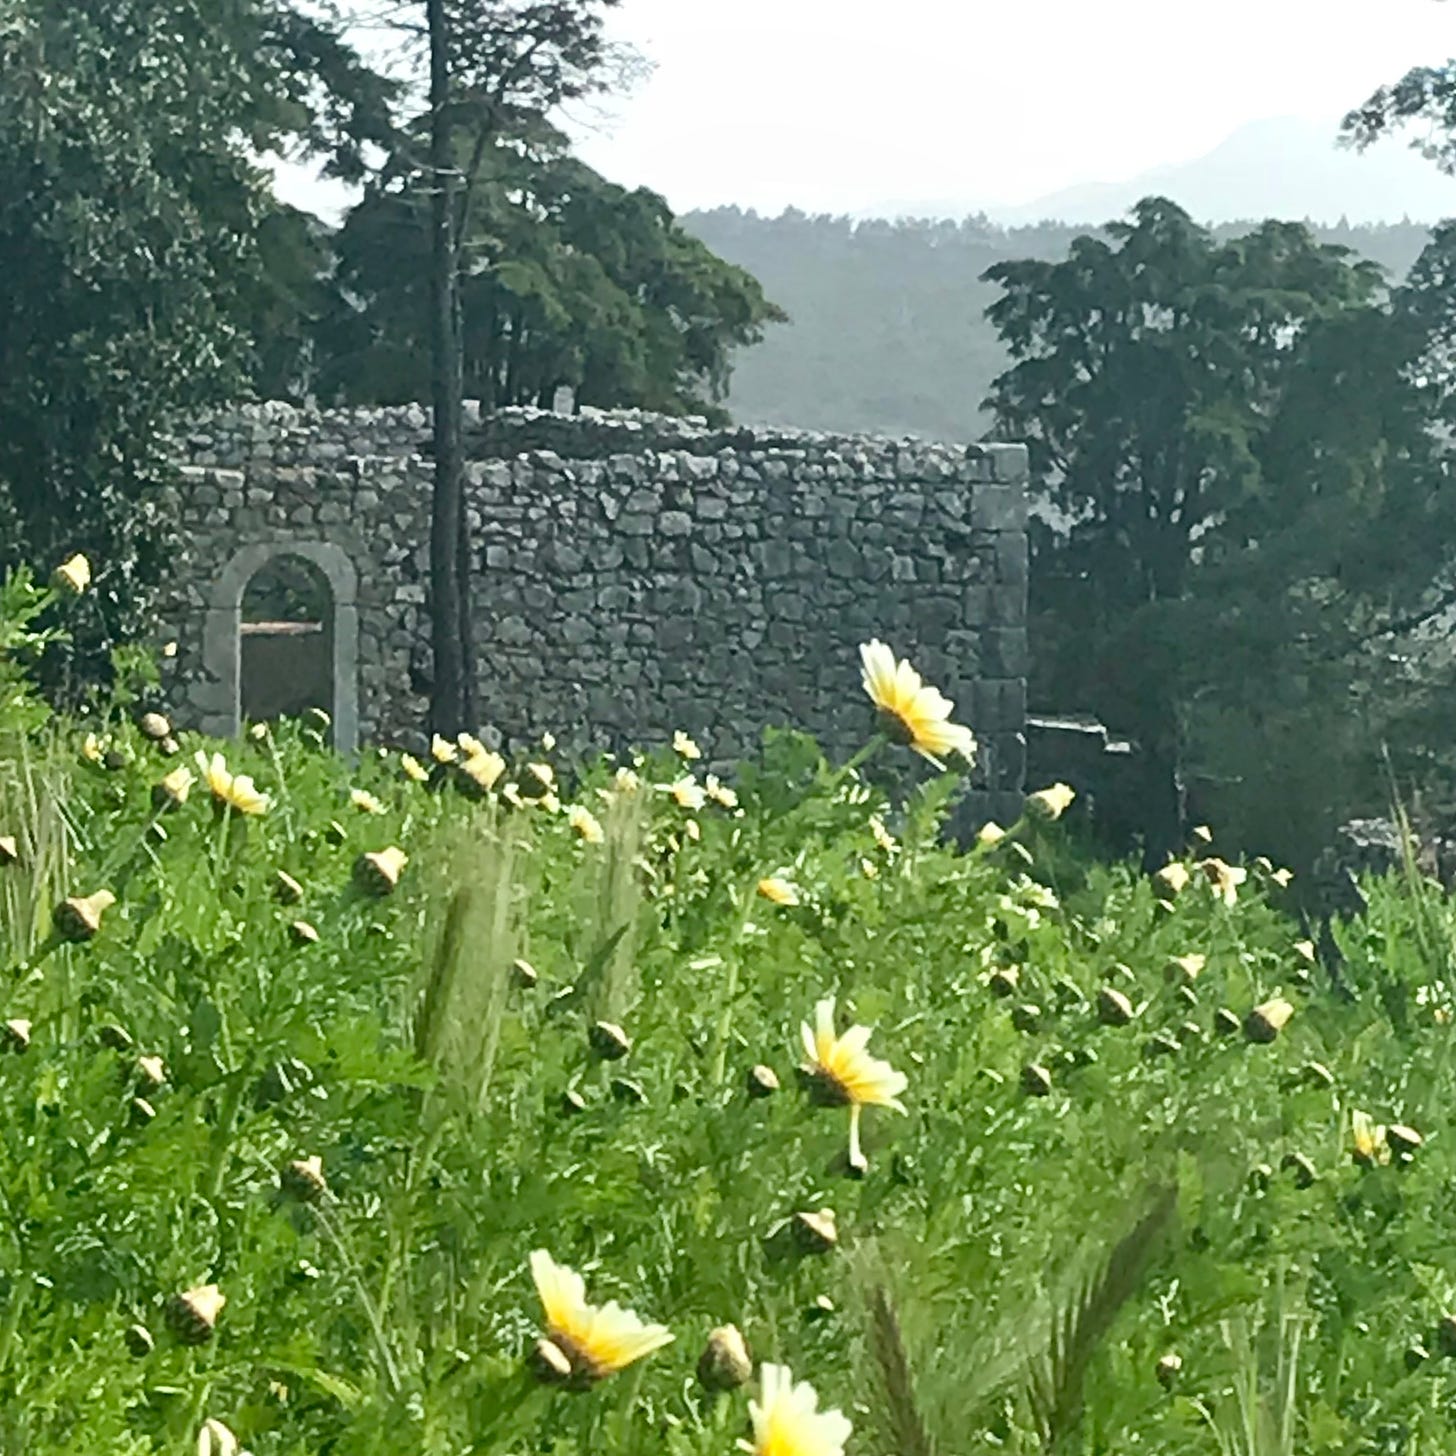 field of yellow flowers near an old stone building in Portugal